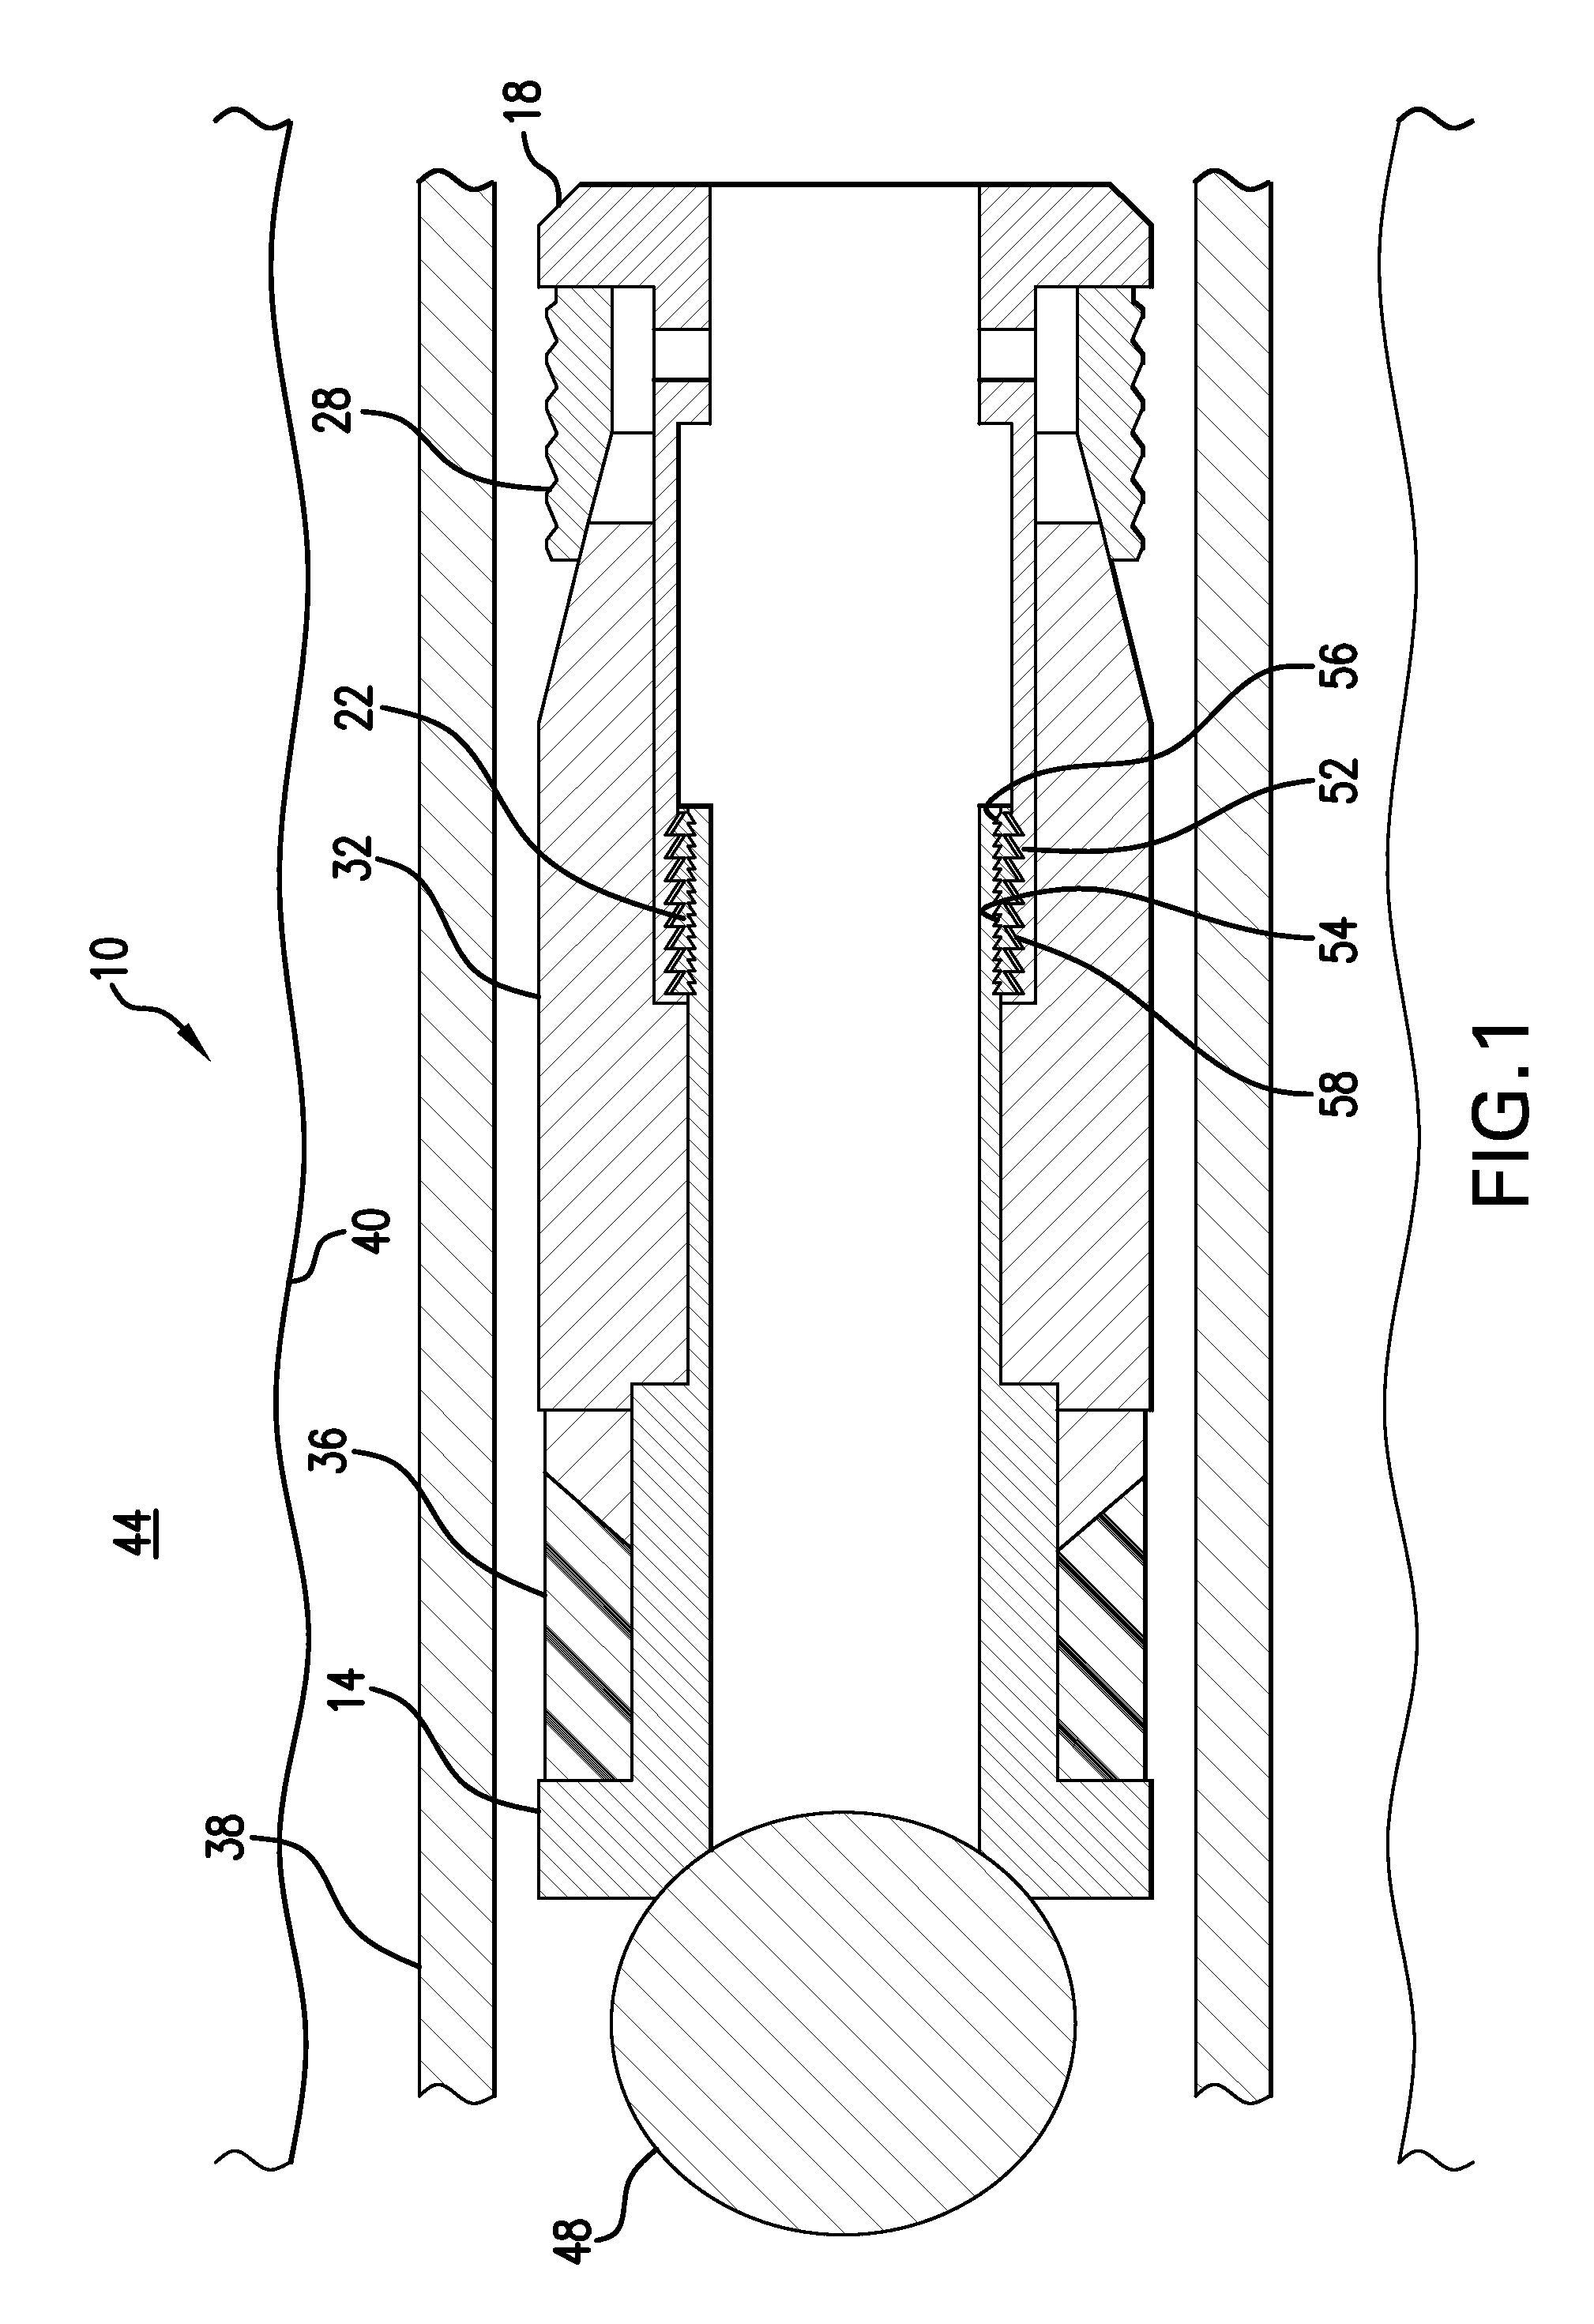 Plug reception assembly and method of reducing restriction in a borehole